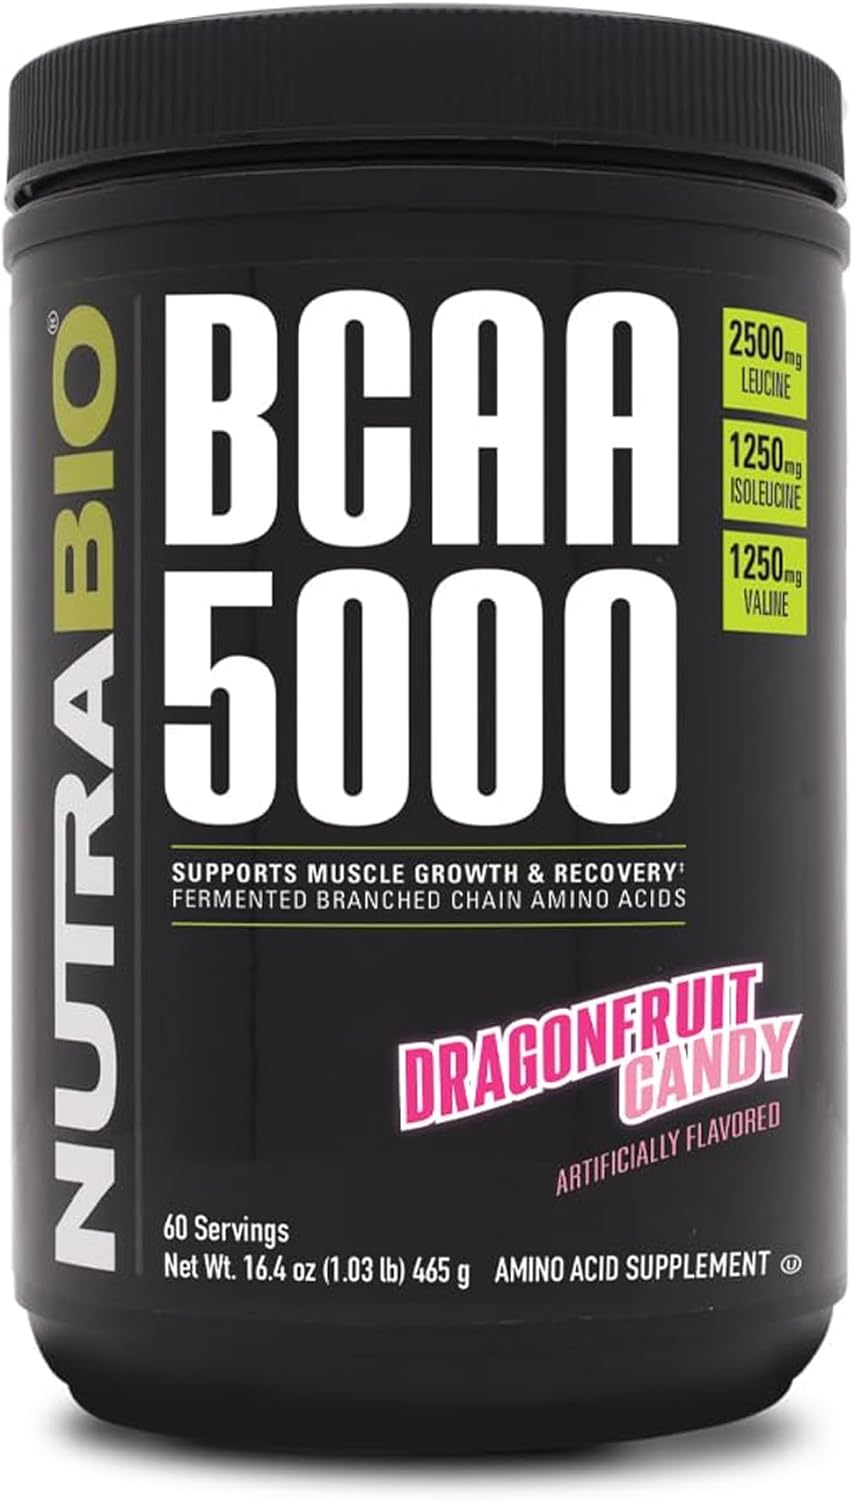 NutraBio BCAA 5000 Powder - Vegan Fermented BCAAs - Supports Lean Muscle Growth, Recovery, Endurance - Zero Fat, Sugar, and Carbs - 60 Servings - Dragonfruit Candy